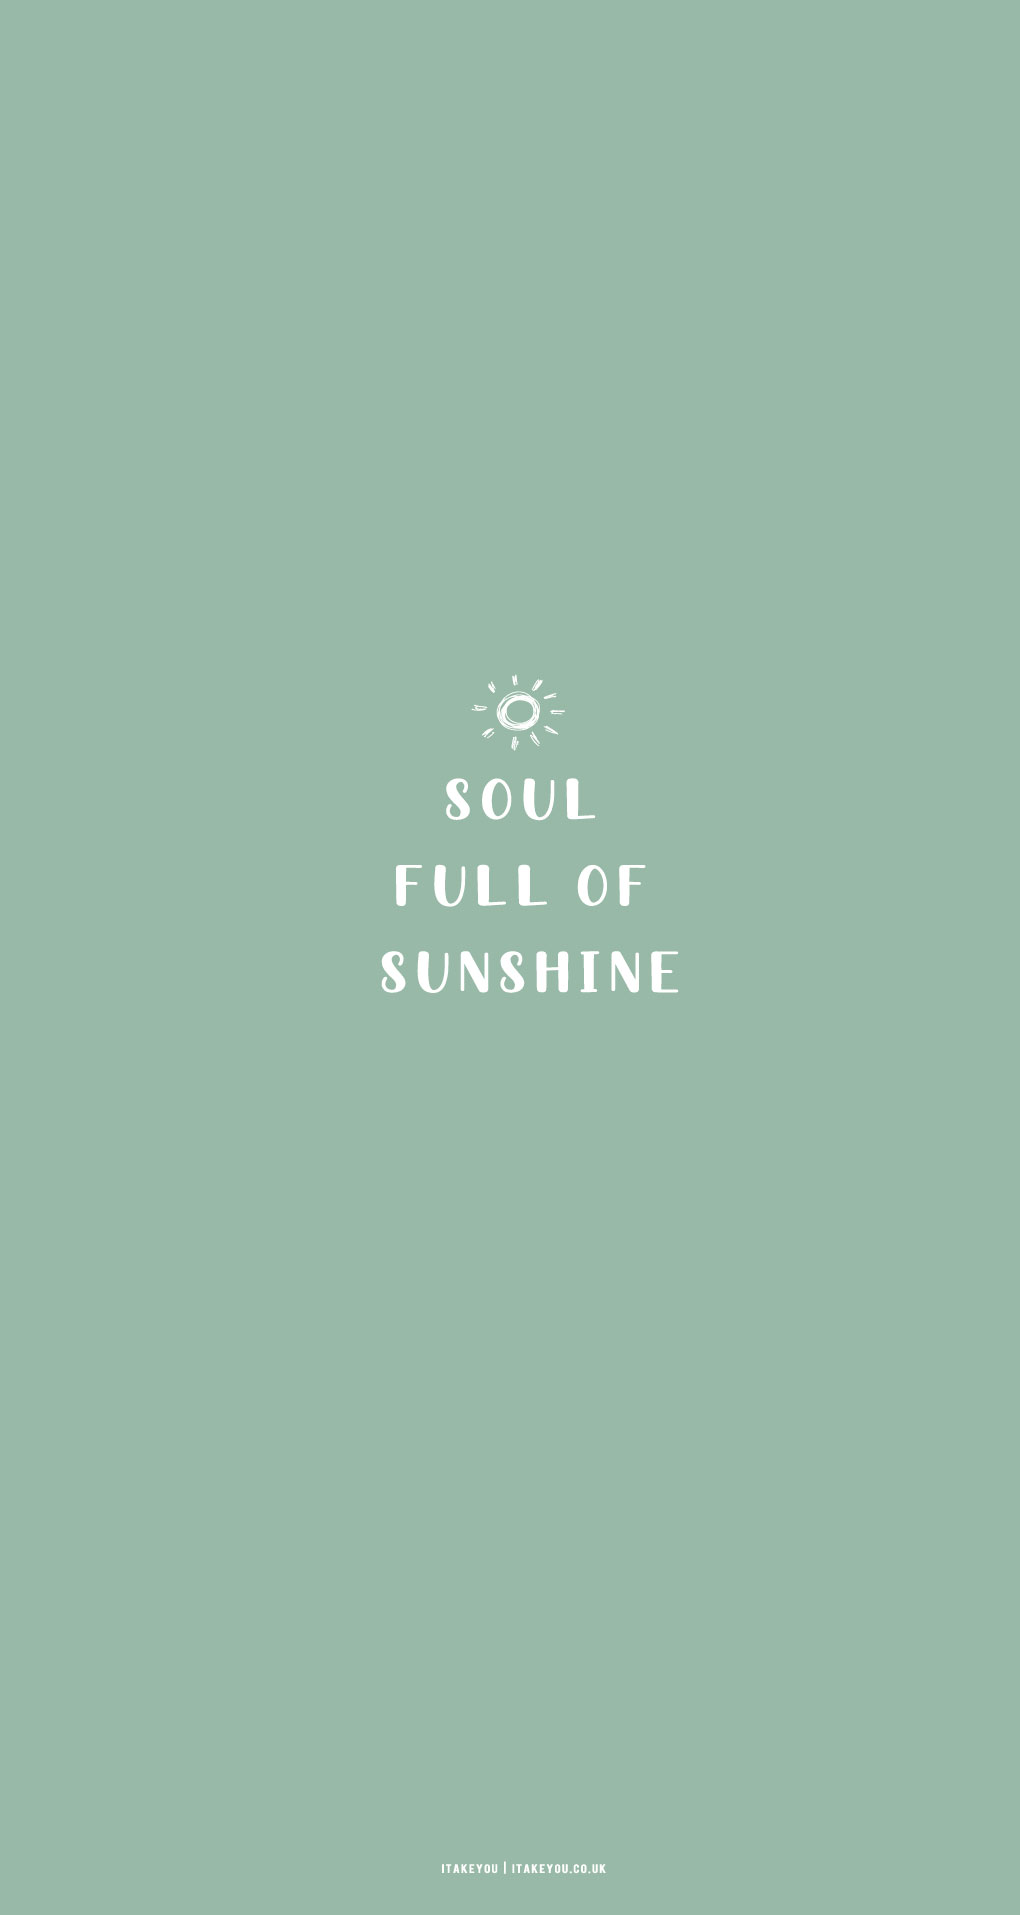 15 Sage Green Minimalist Wallpapers for Phone : Soul Full of Sunshine